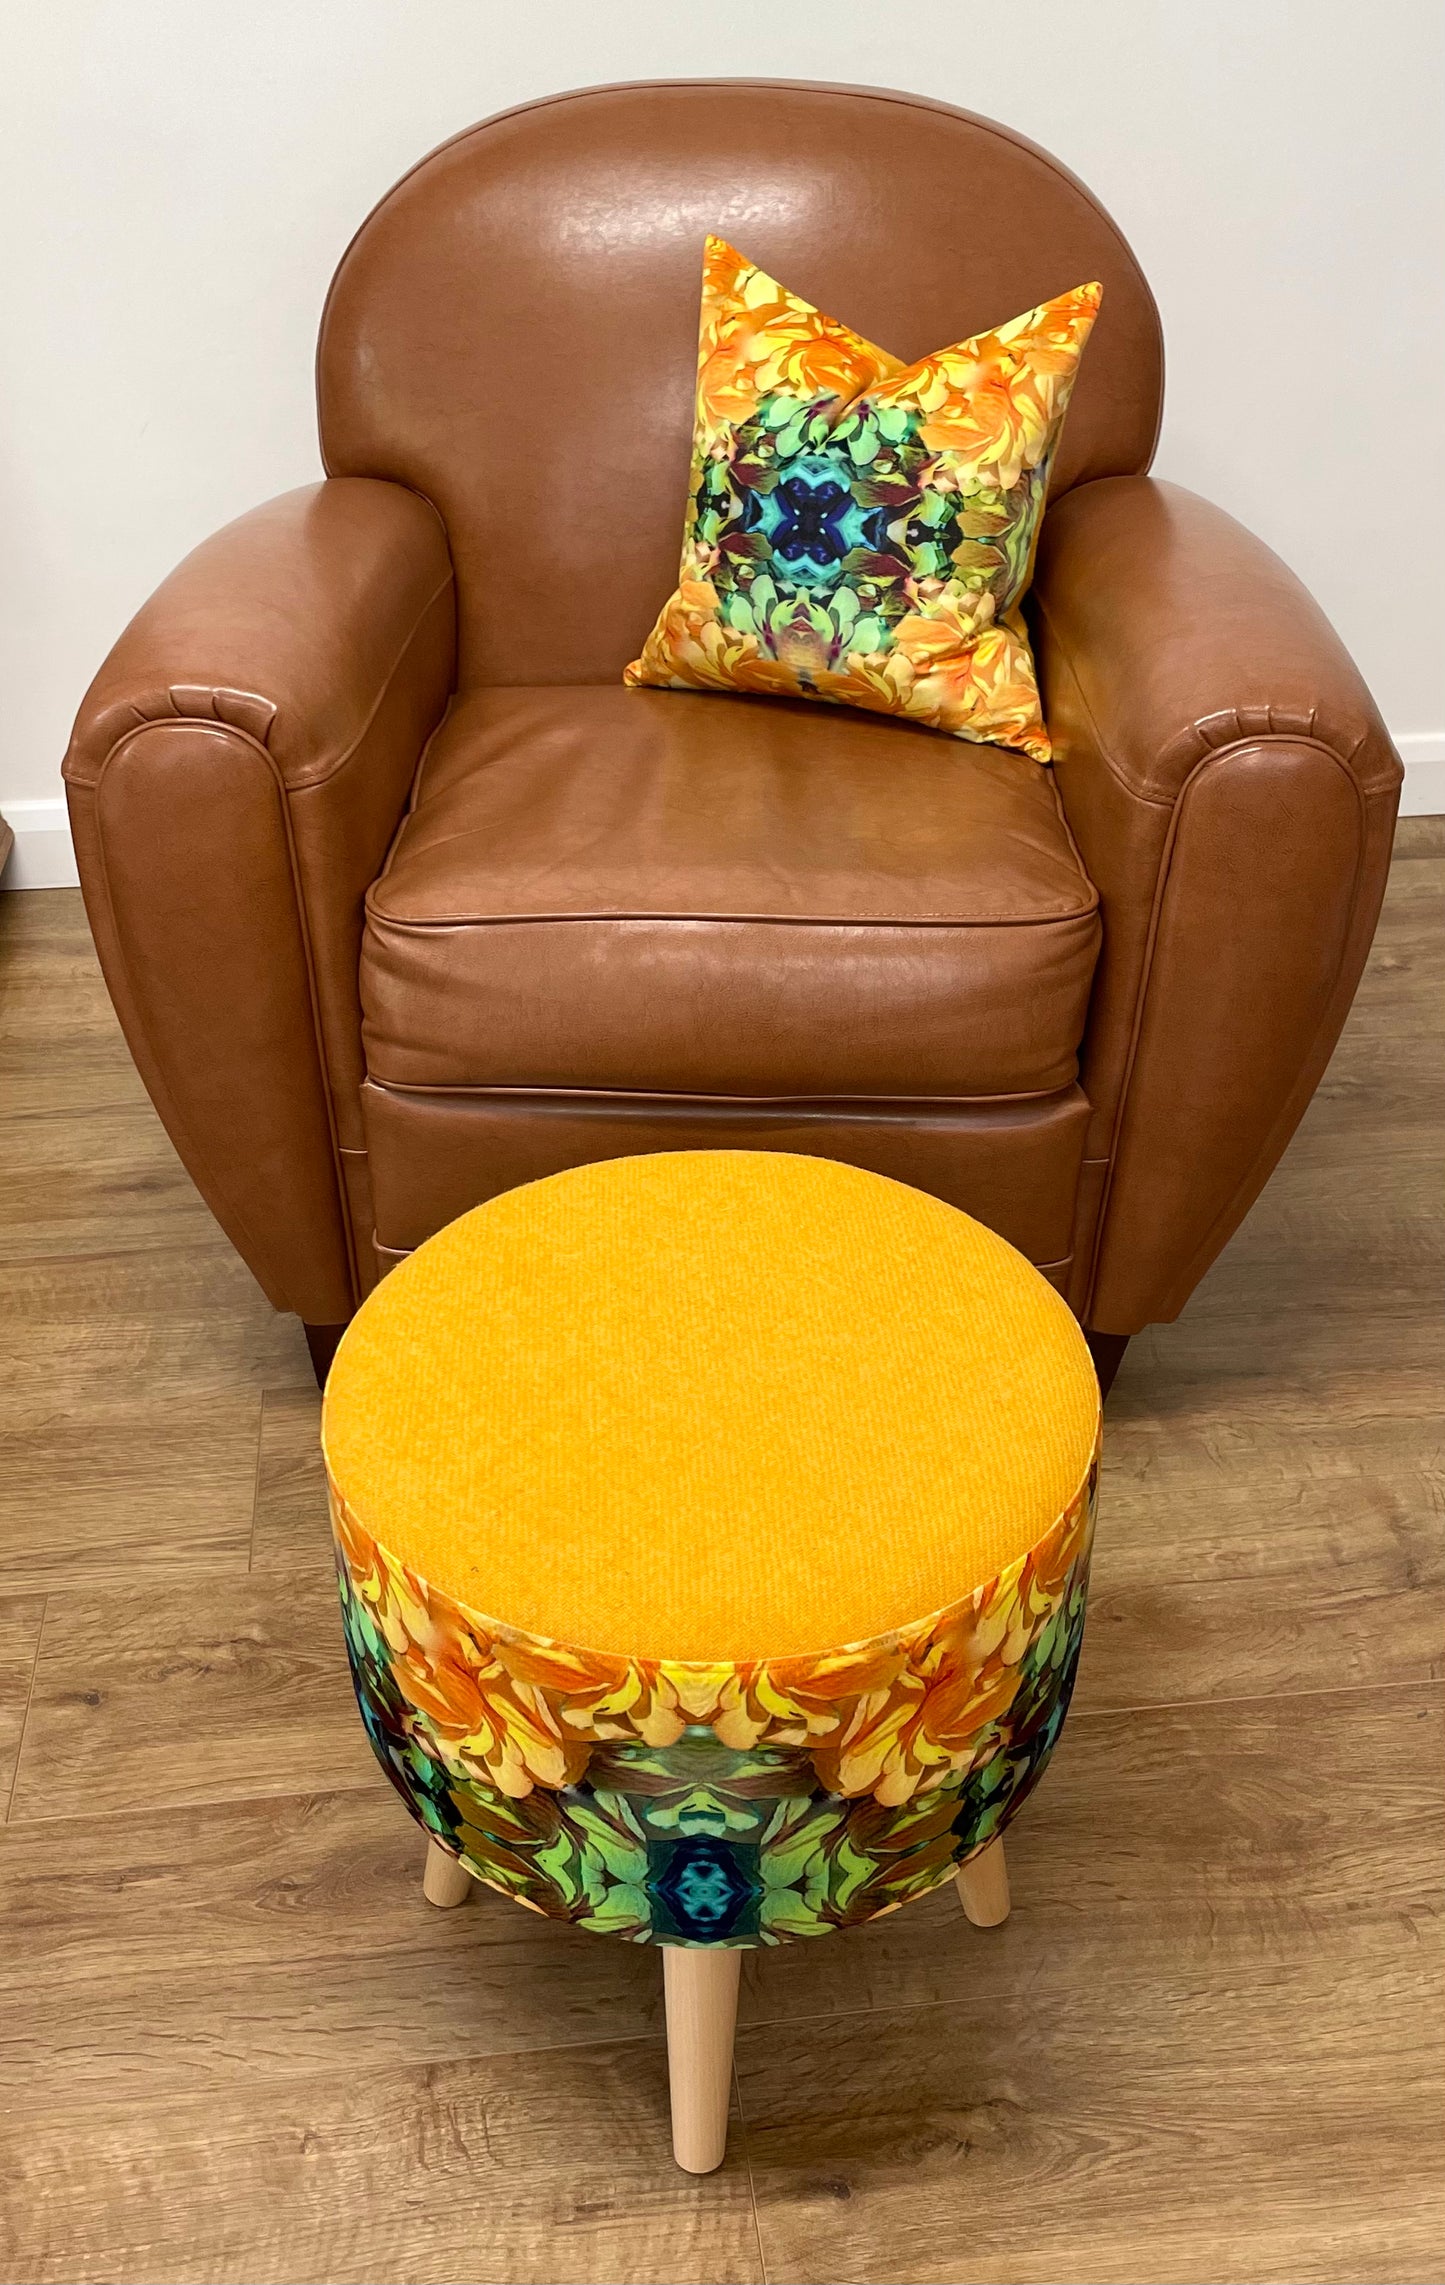 Vibrant Yellow Floral Velvet and Harris Tweed Small Cushion 16”